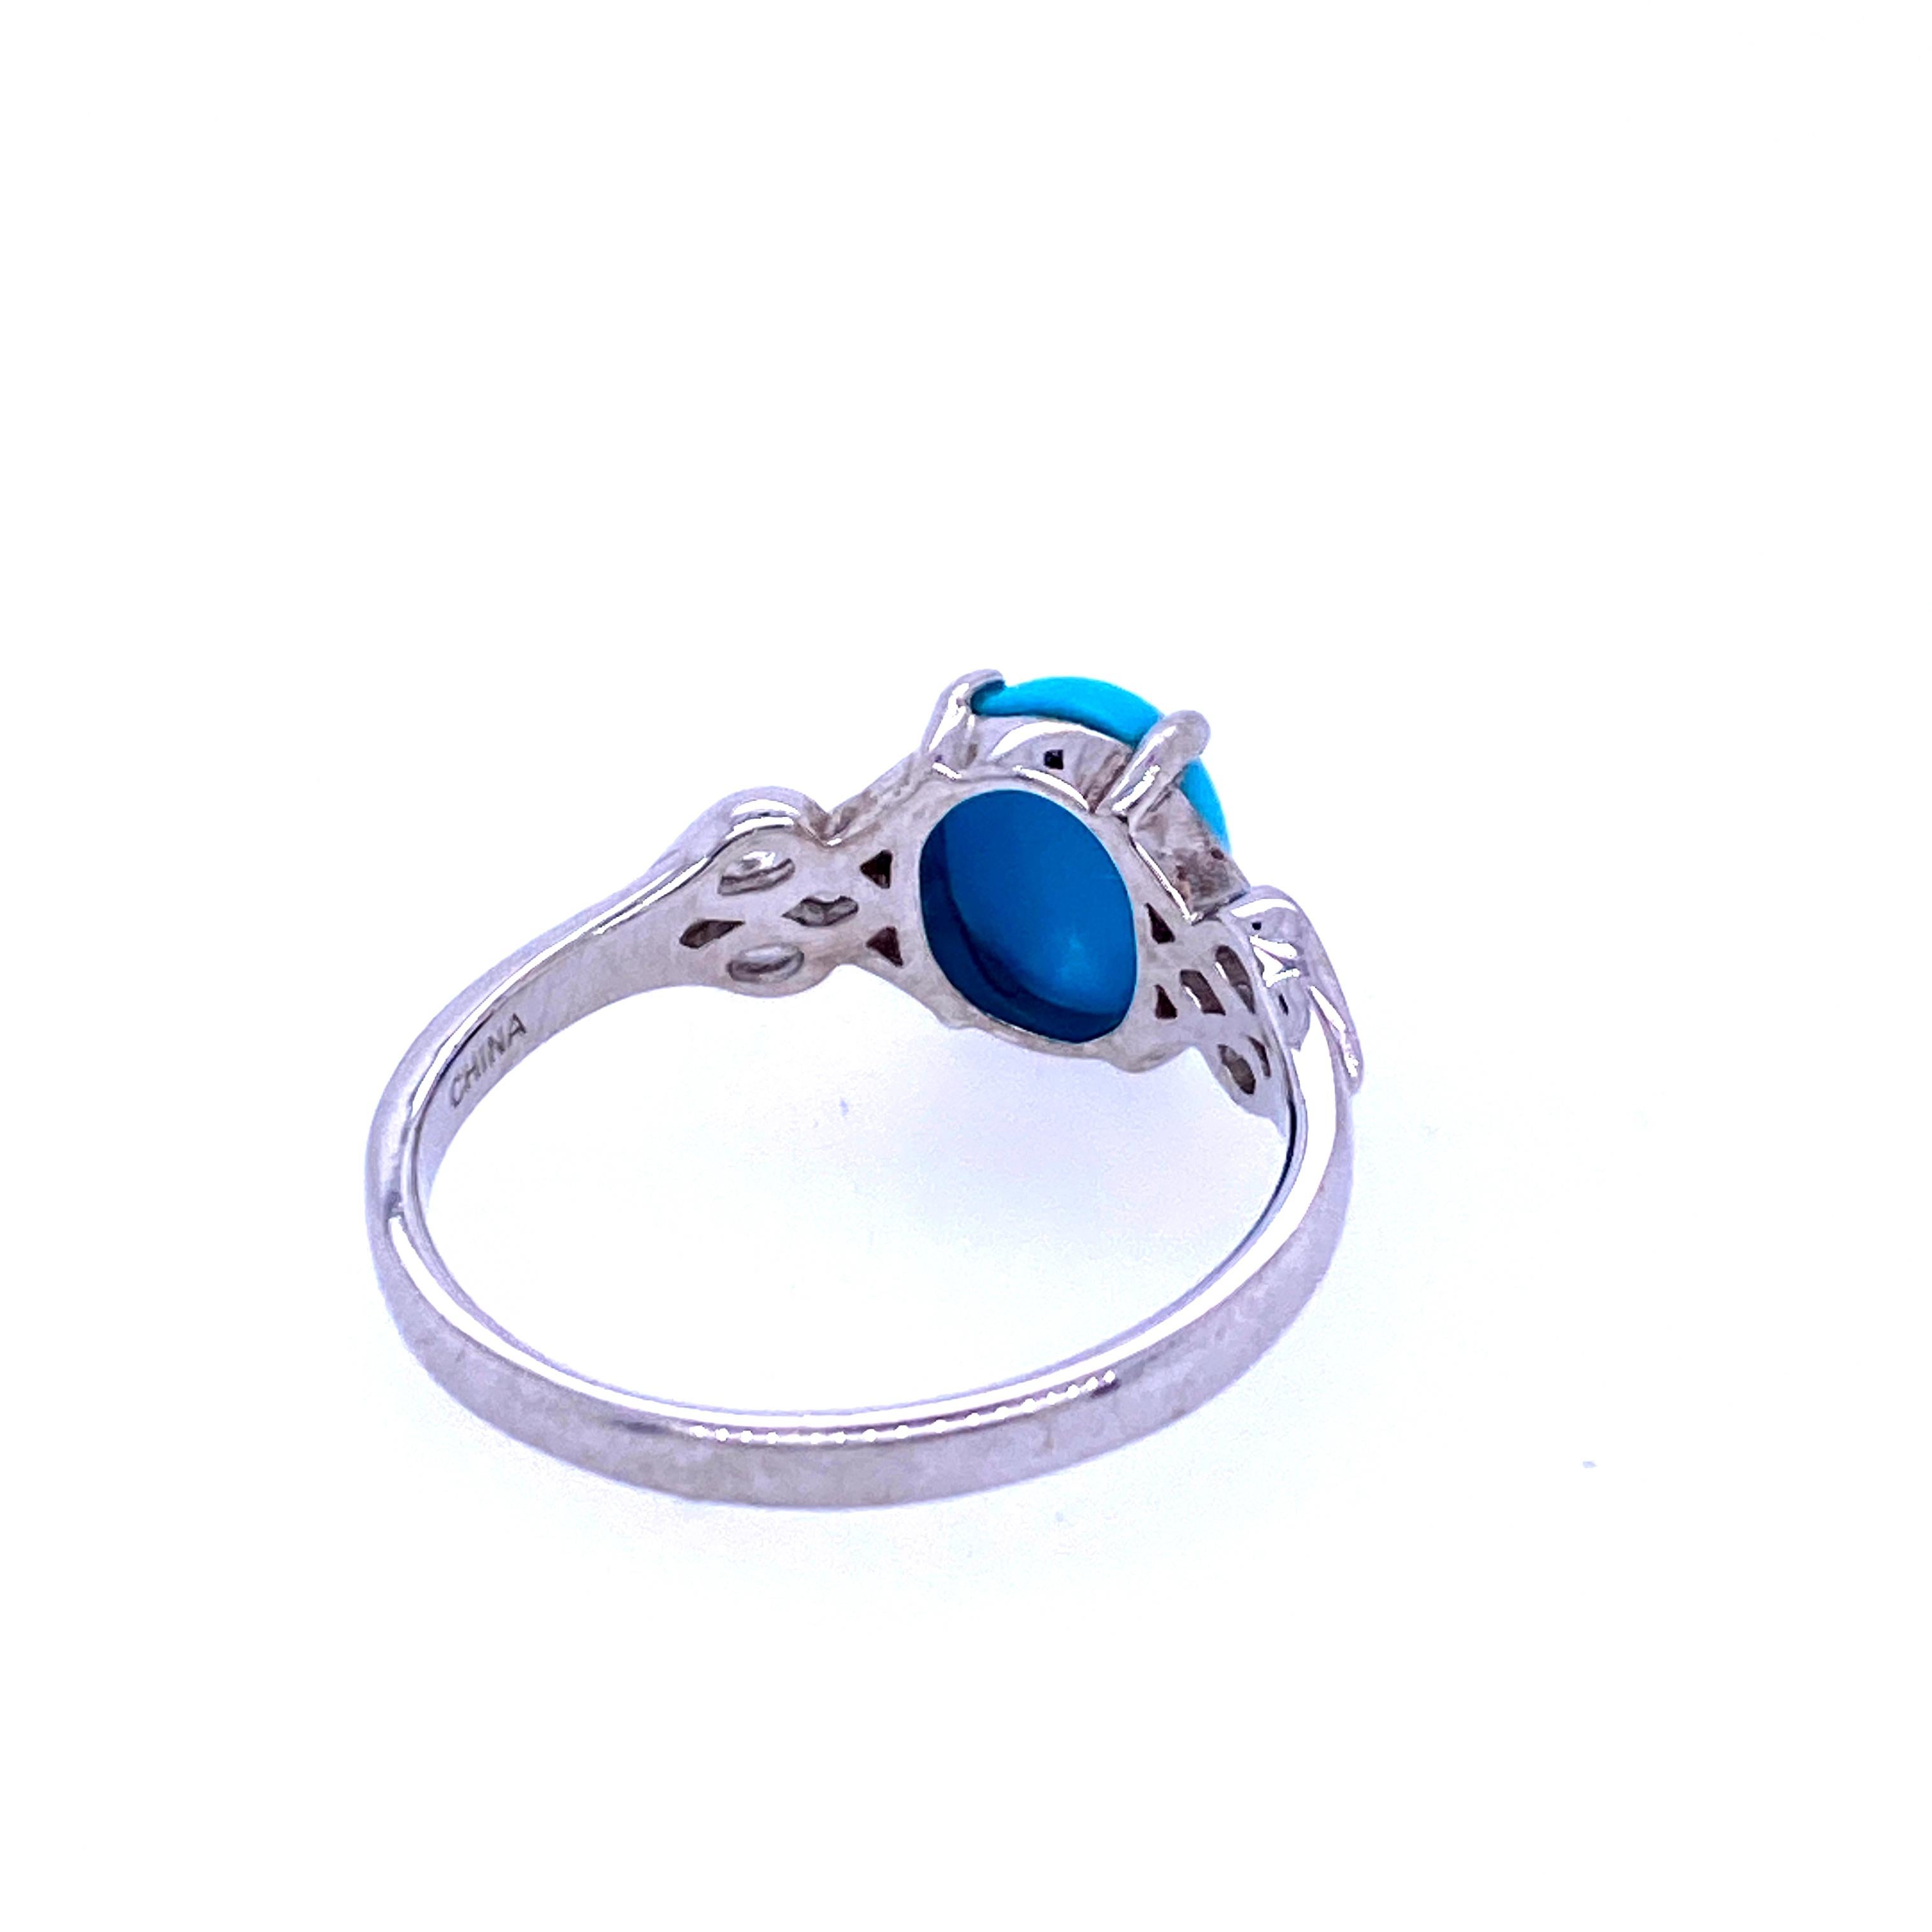 One sterling silver (stamped 925) ring prong set with one 9.86 x 7.78mm oval turquoise stone.  The shank measures 2.5mm near the top of the ring and tapers to 2.15 at the base.  The ring is a finger size 9.  